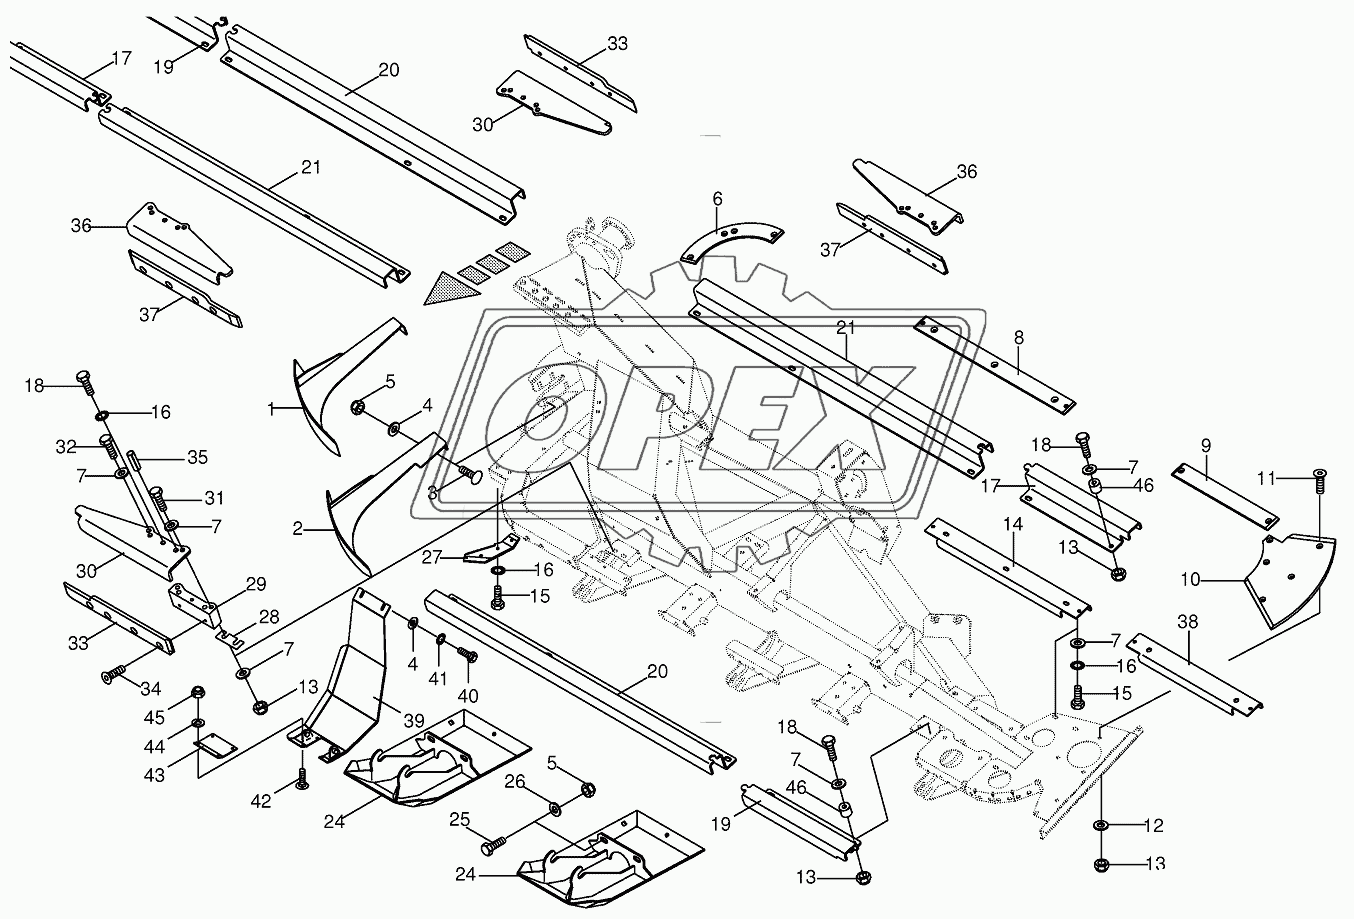 Mounting parts - lateral